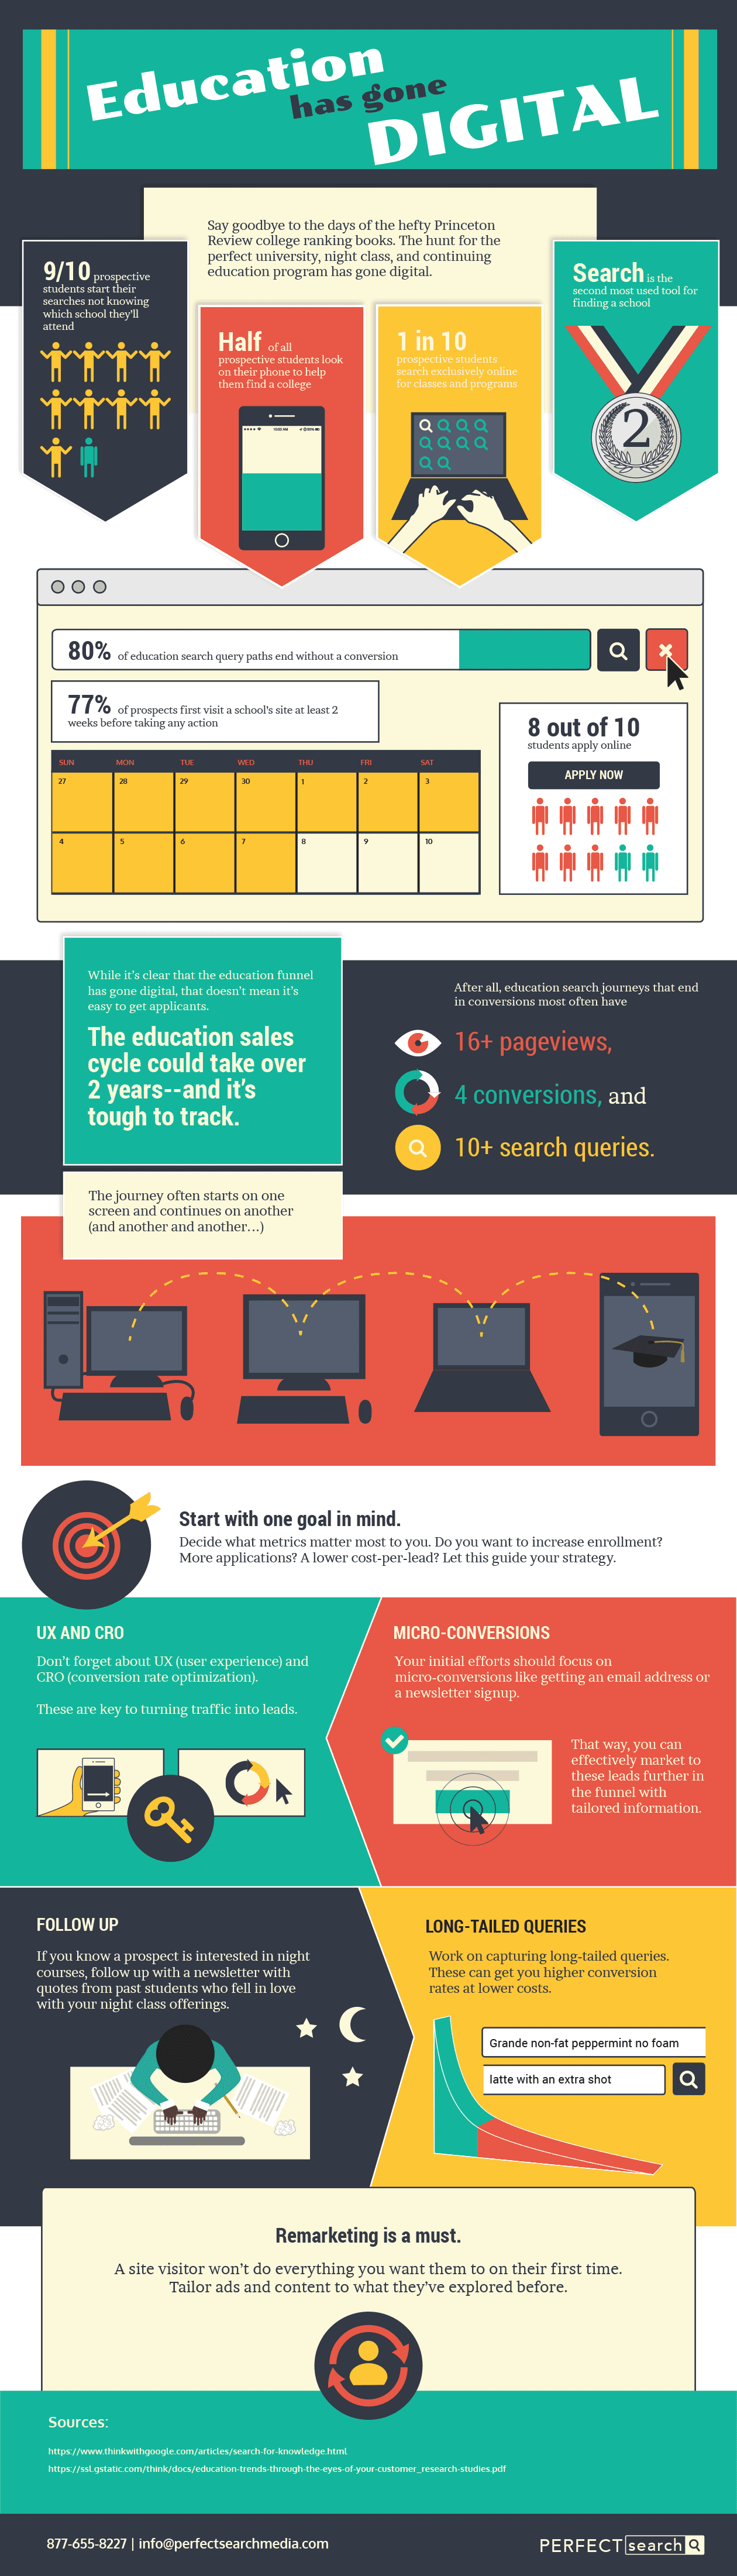 Perfect Search Education Infographic